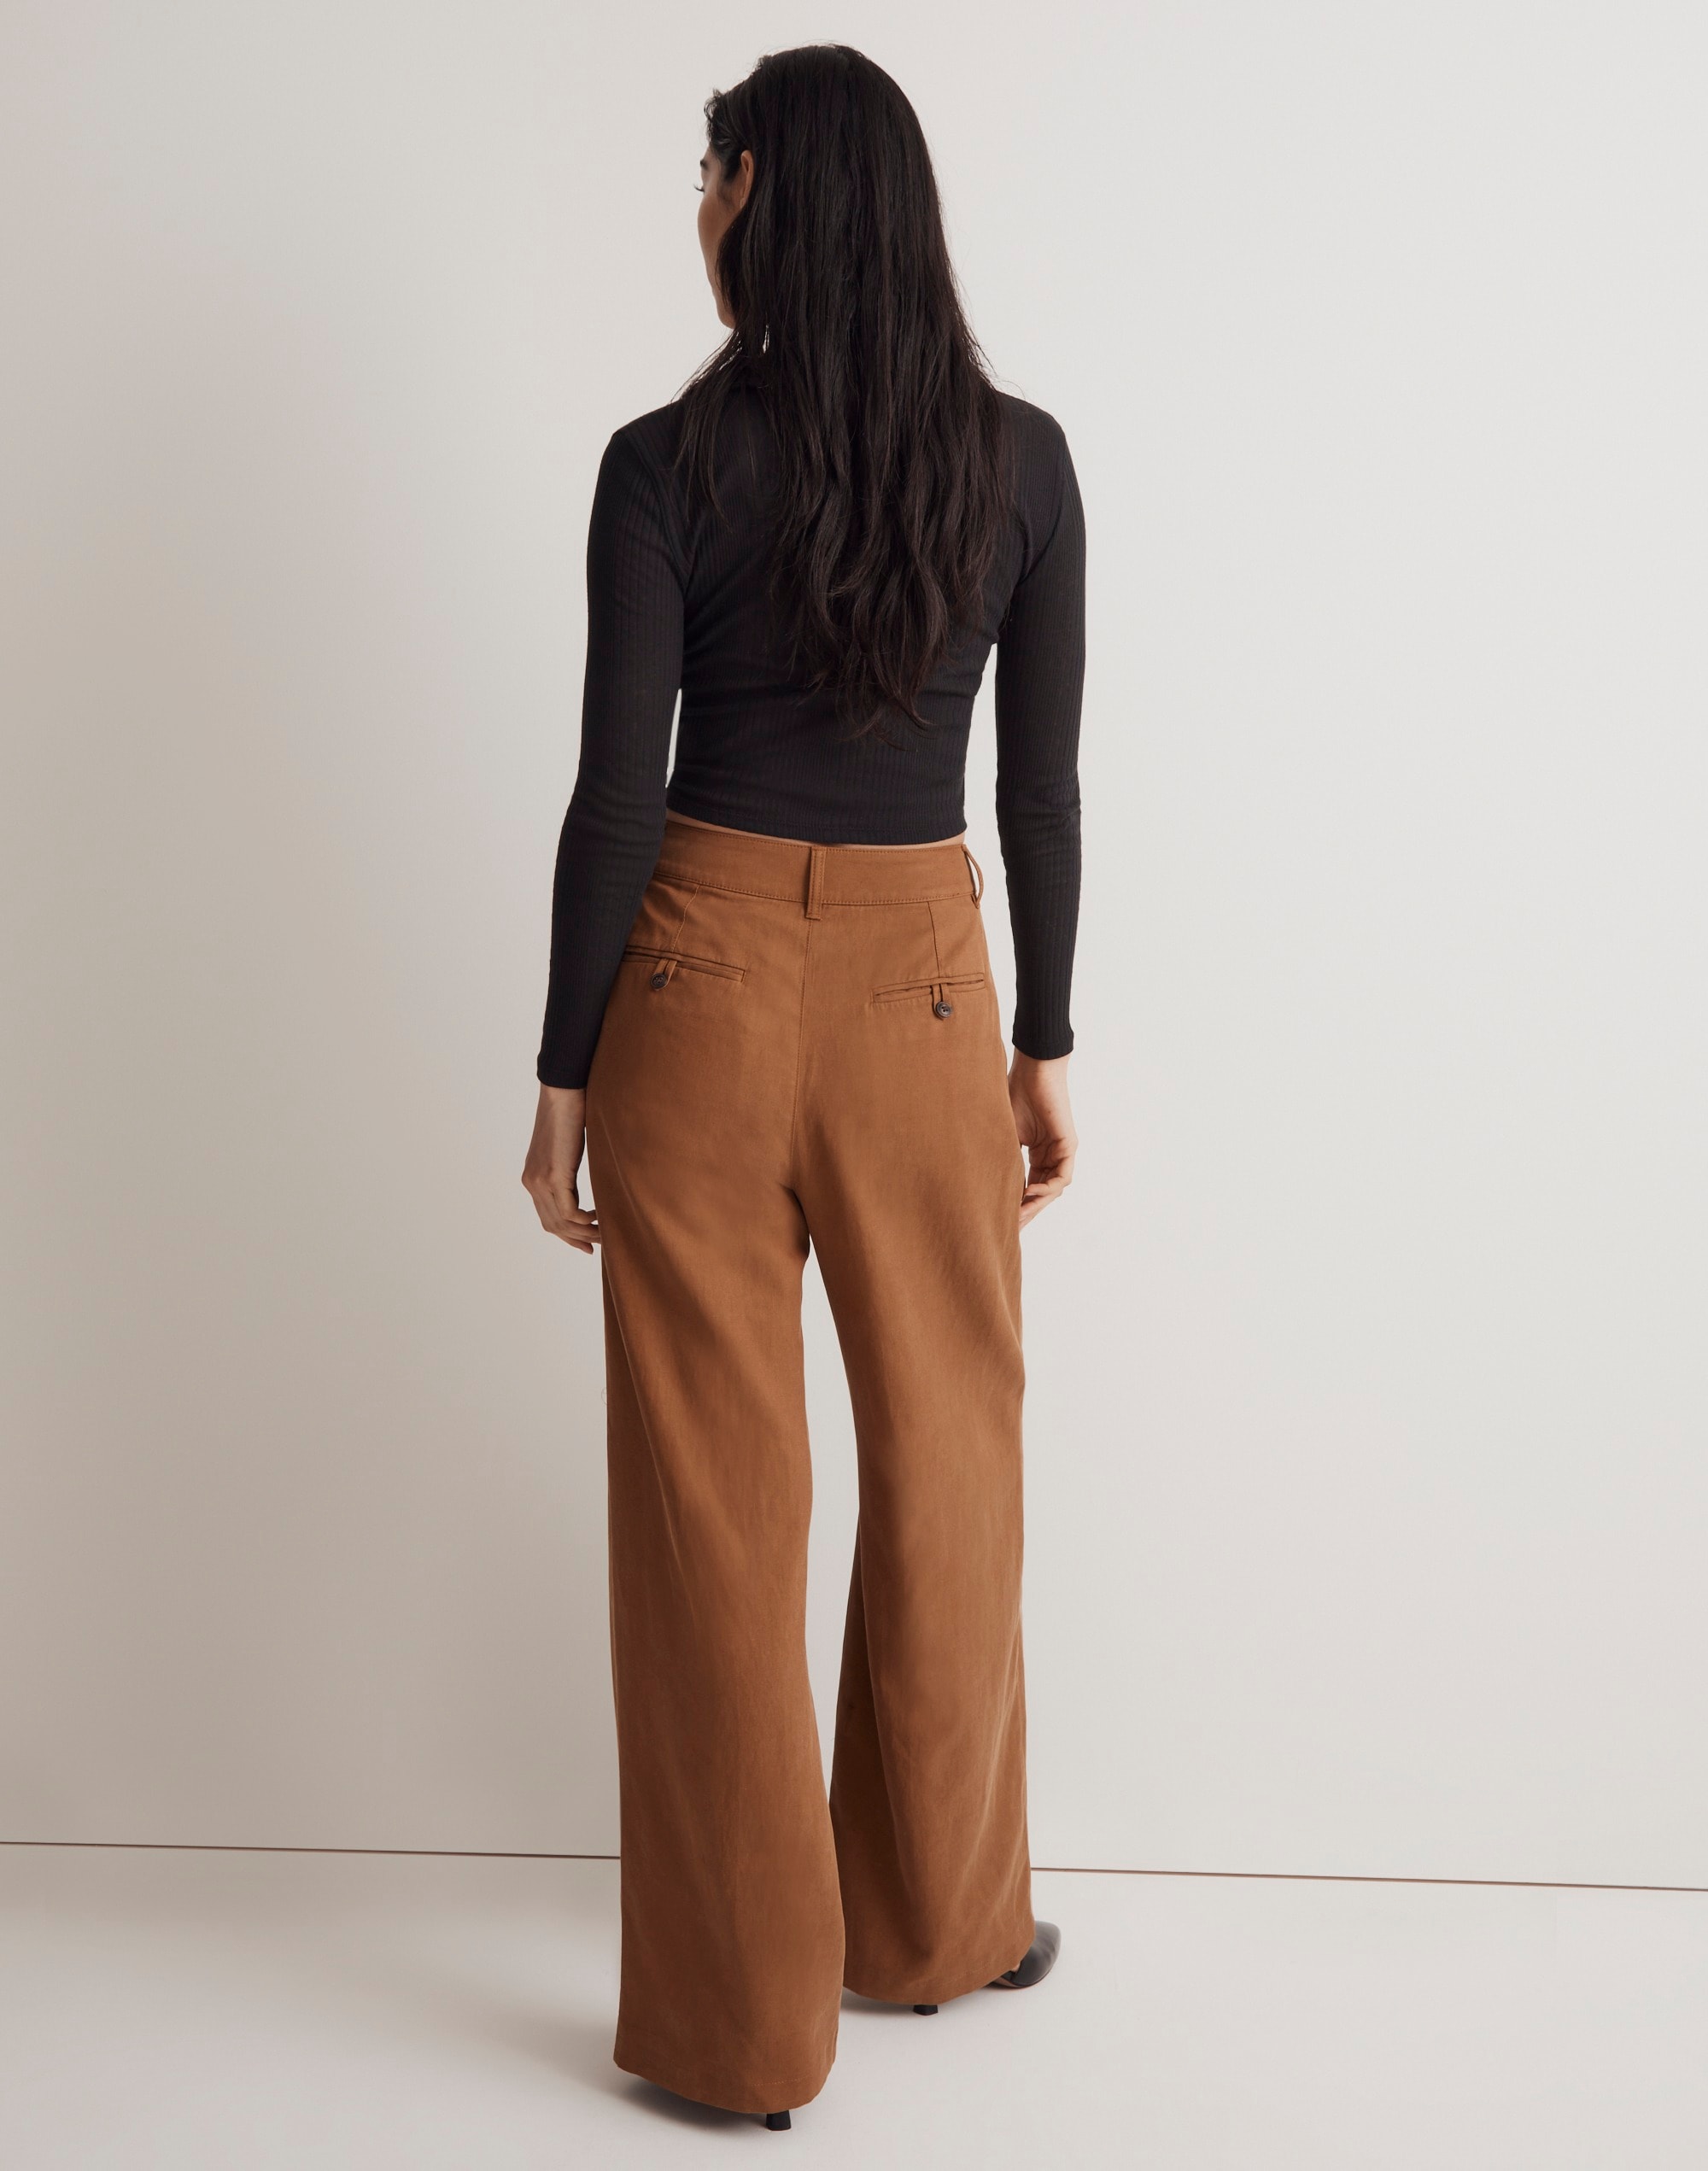 Madewell Work Pants Review  Harlow Wide-Leg Pant and Petite